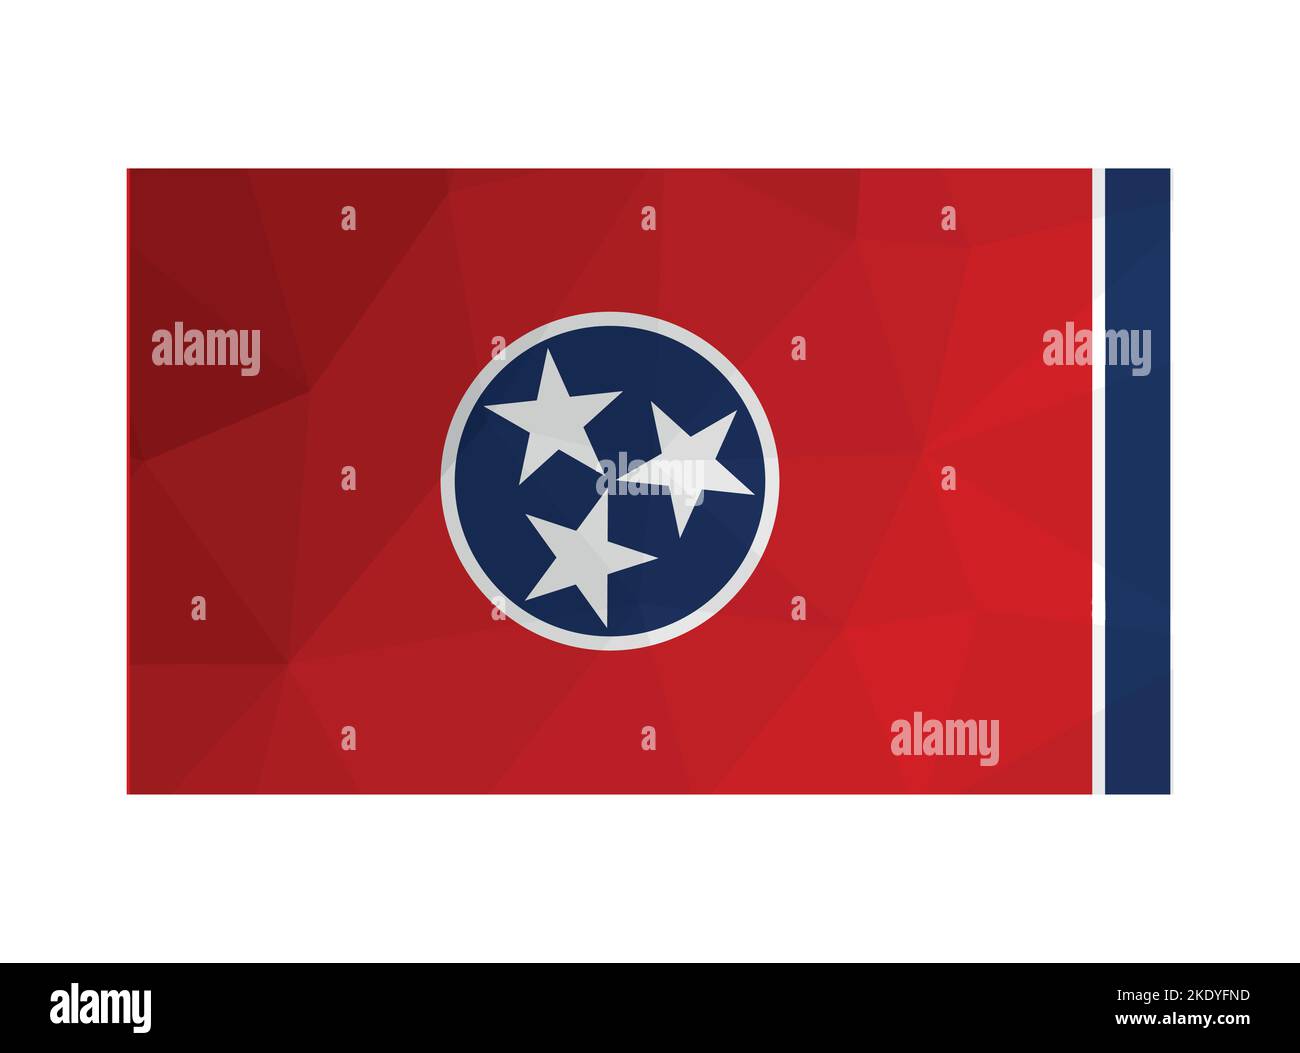 Vector illustration. Official ensign of Tennessee (USA states). National flag in blue and red colors with 3 white stars. Creative design in polygonal Stock Vector